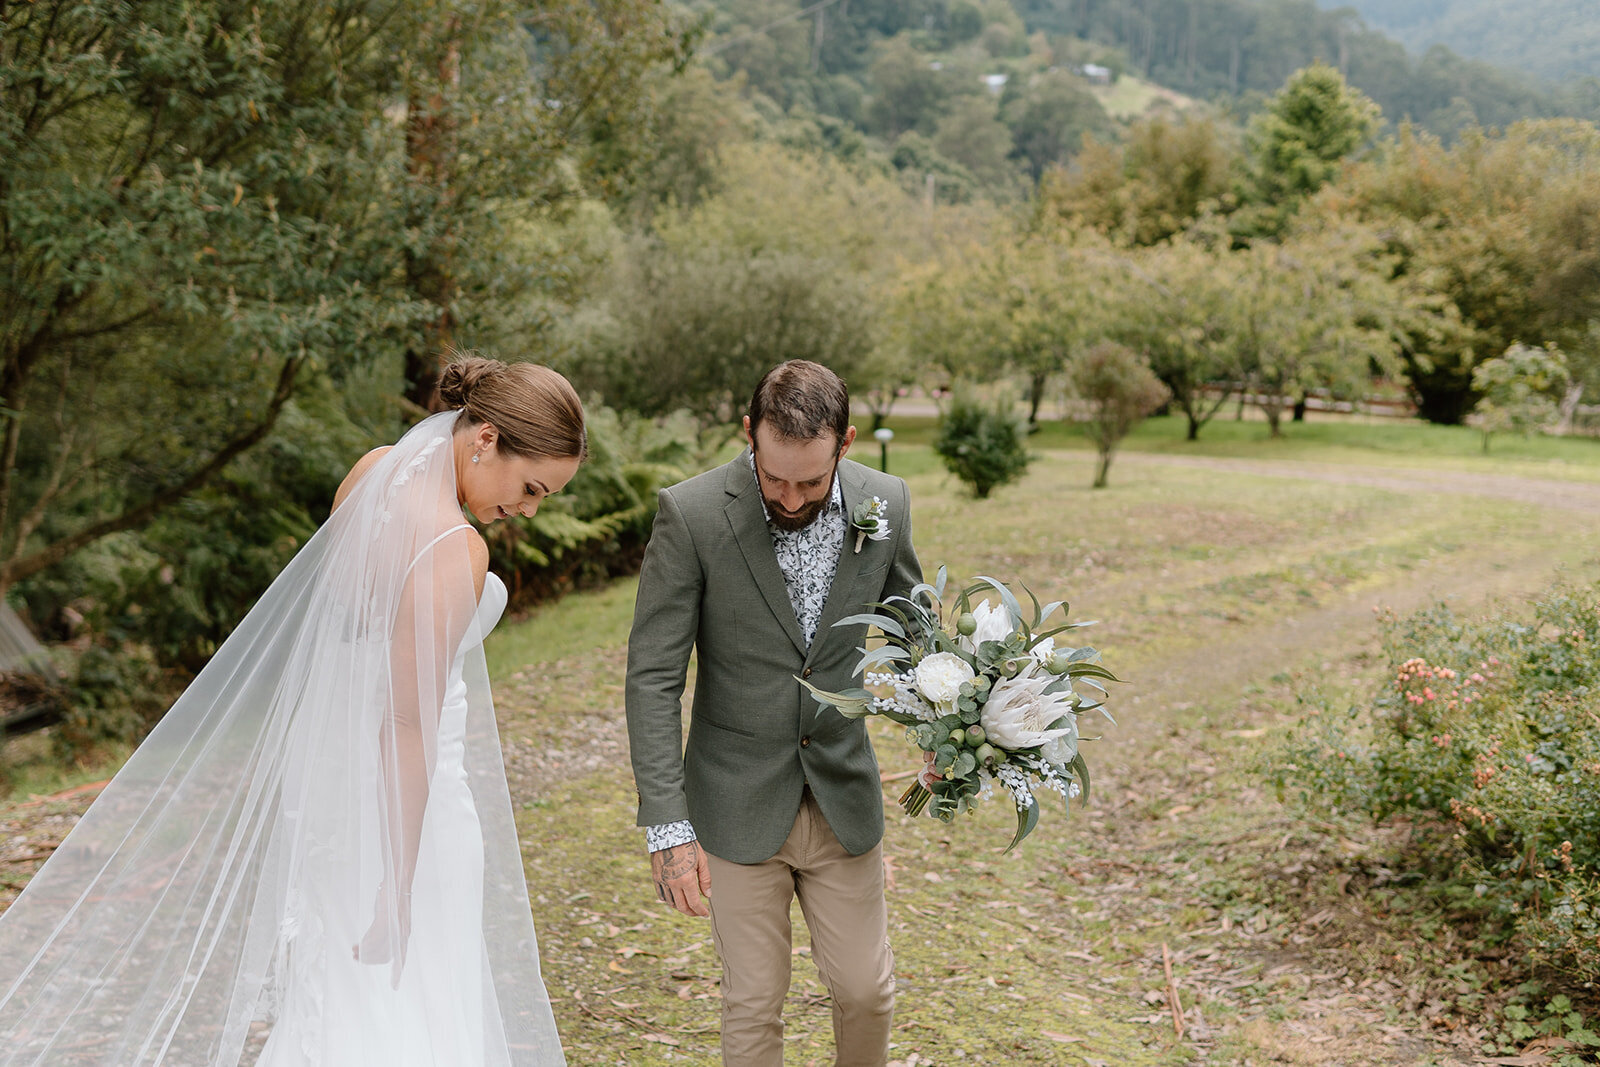 Stacey&Cory-Coast&Pines-72